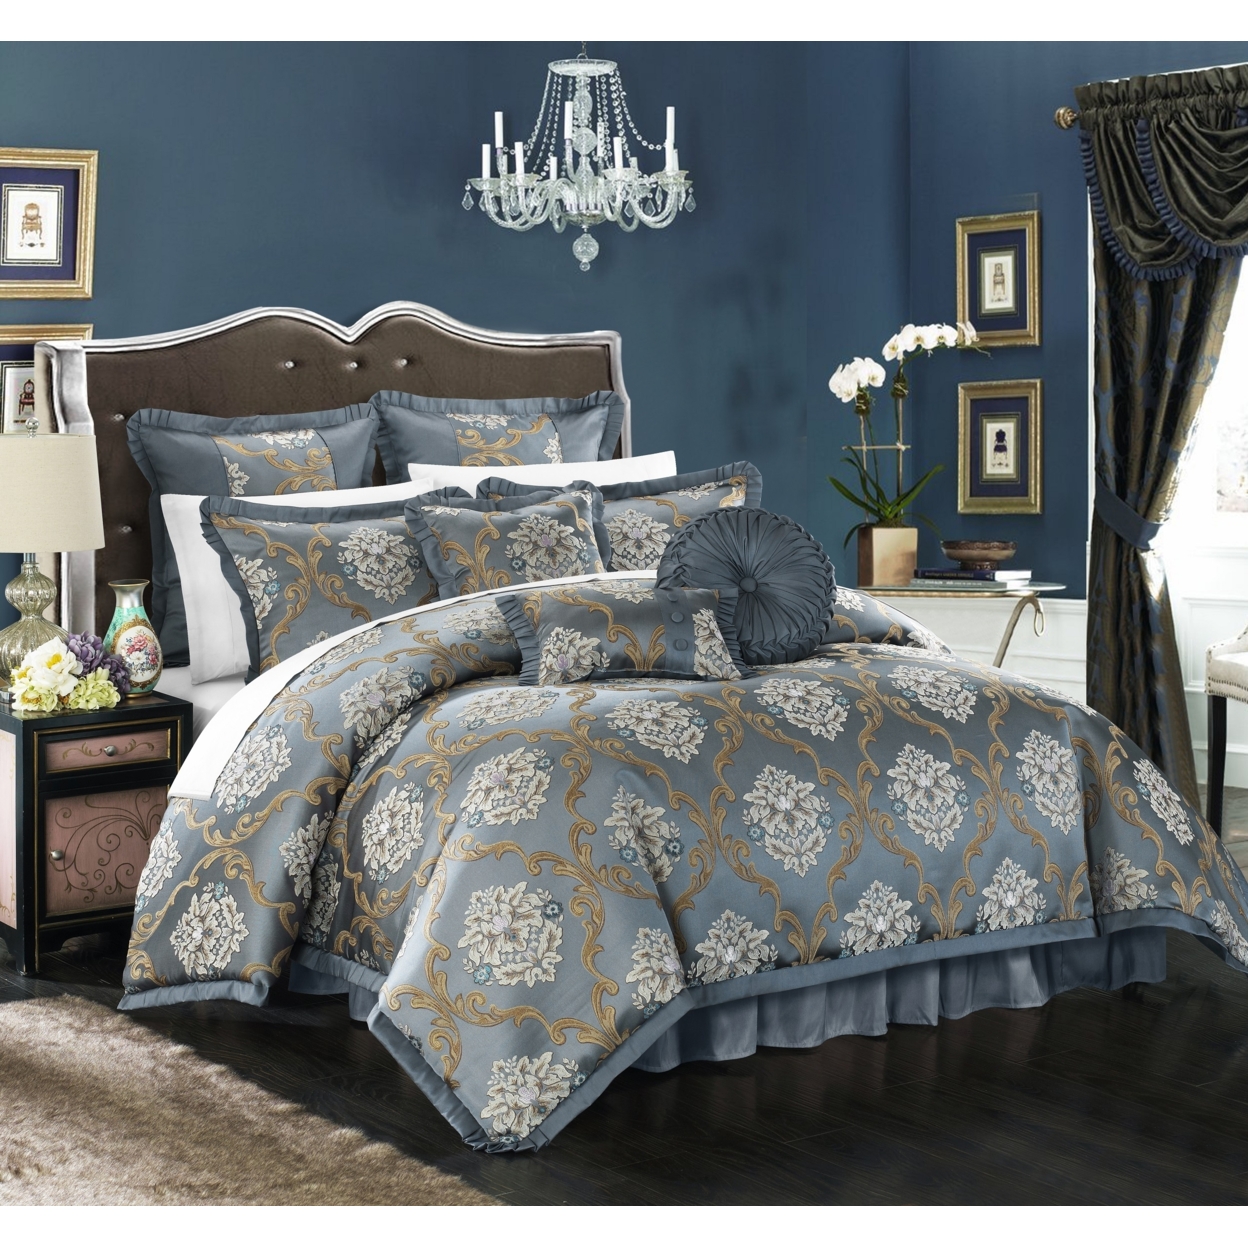 9 Piece Aubrey Decorator Upholstery Quality Jacquard Scroll Fabric Complete Master Bedroom Comforter Set And Pillows Ensemble - Blue, Queen